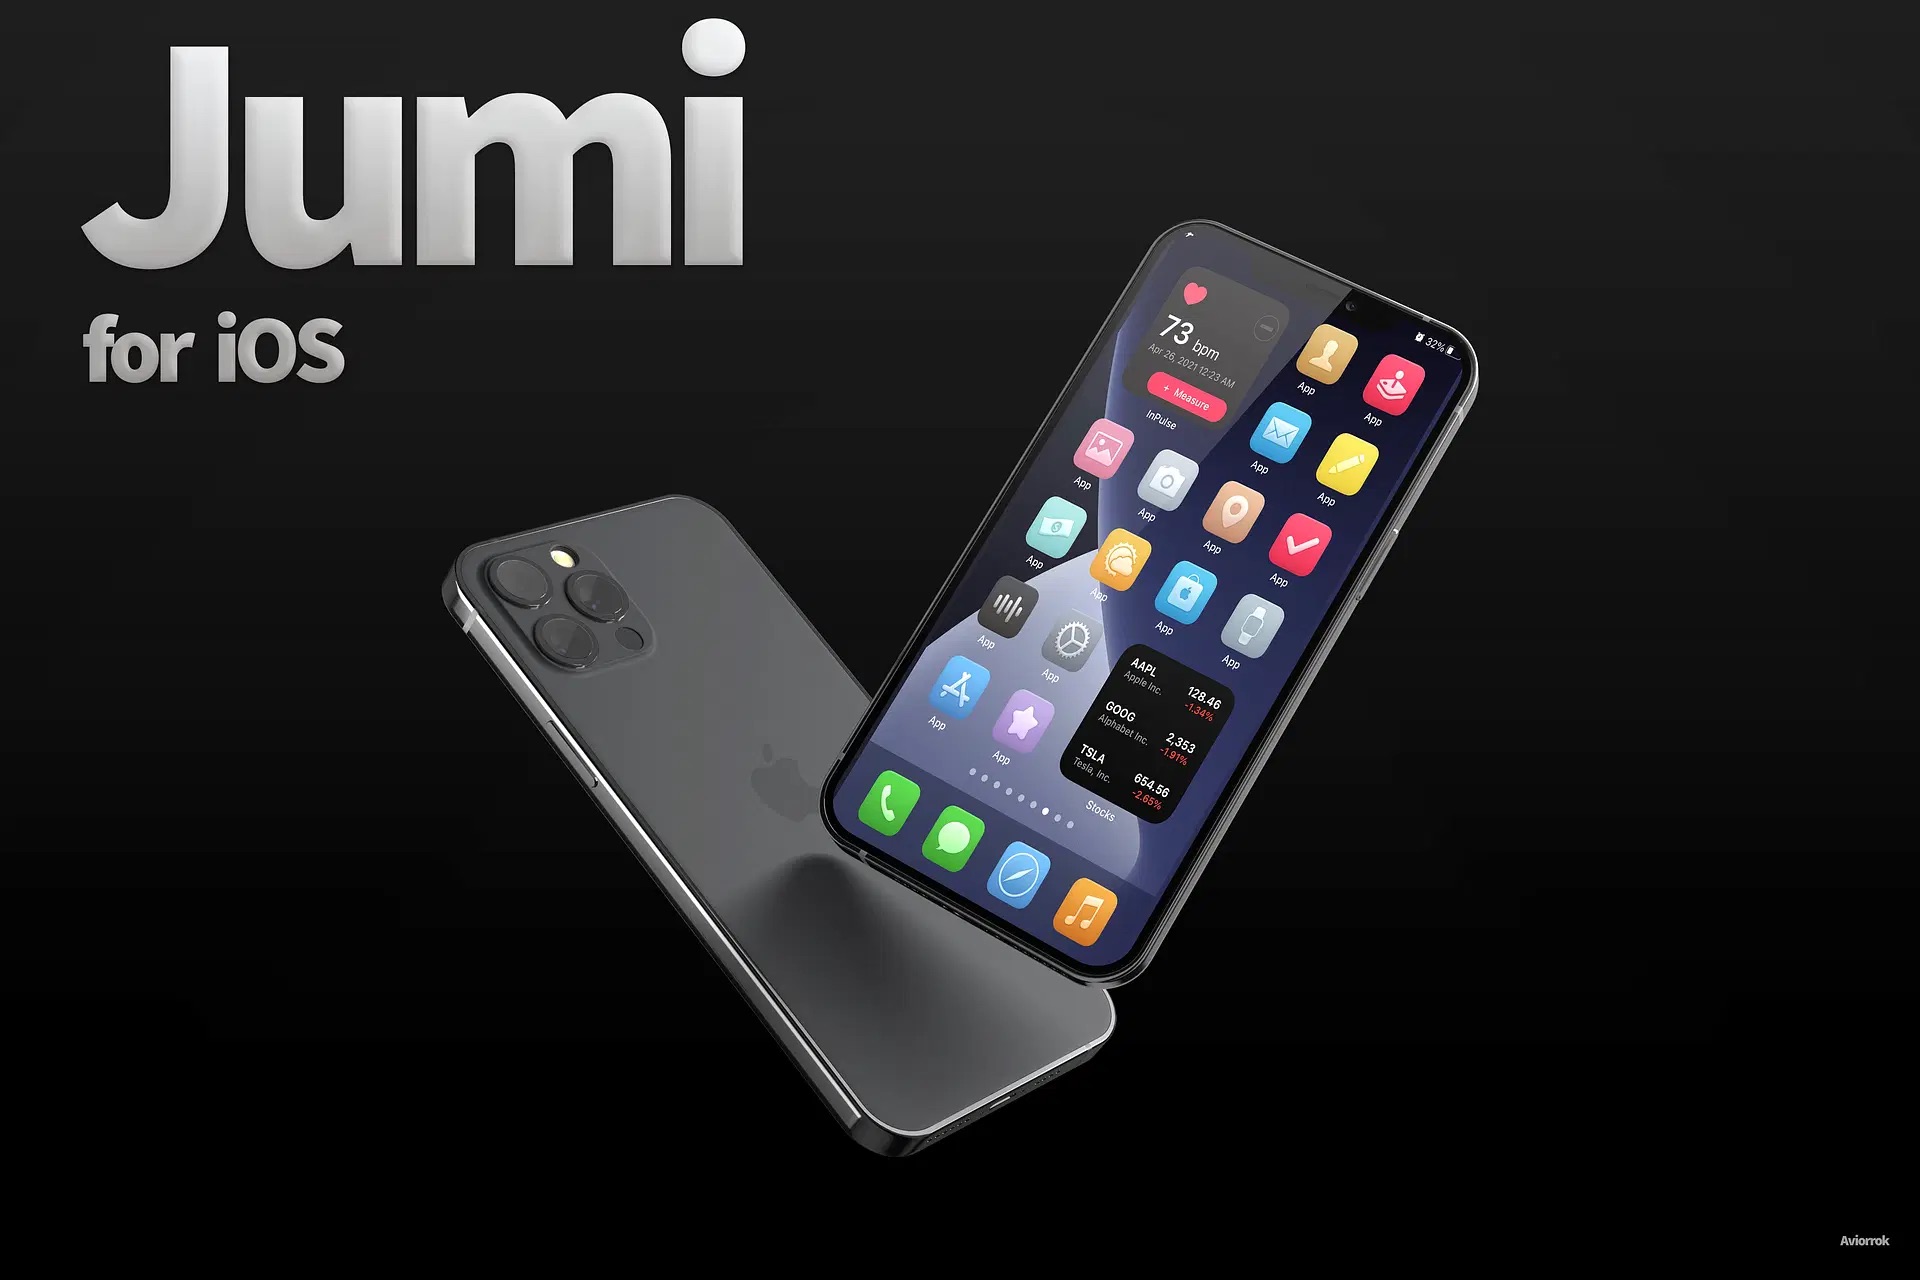 The new Jumi theme gives iPhones and iPads an incredible new look